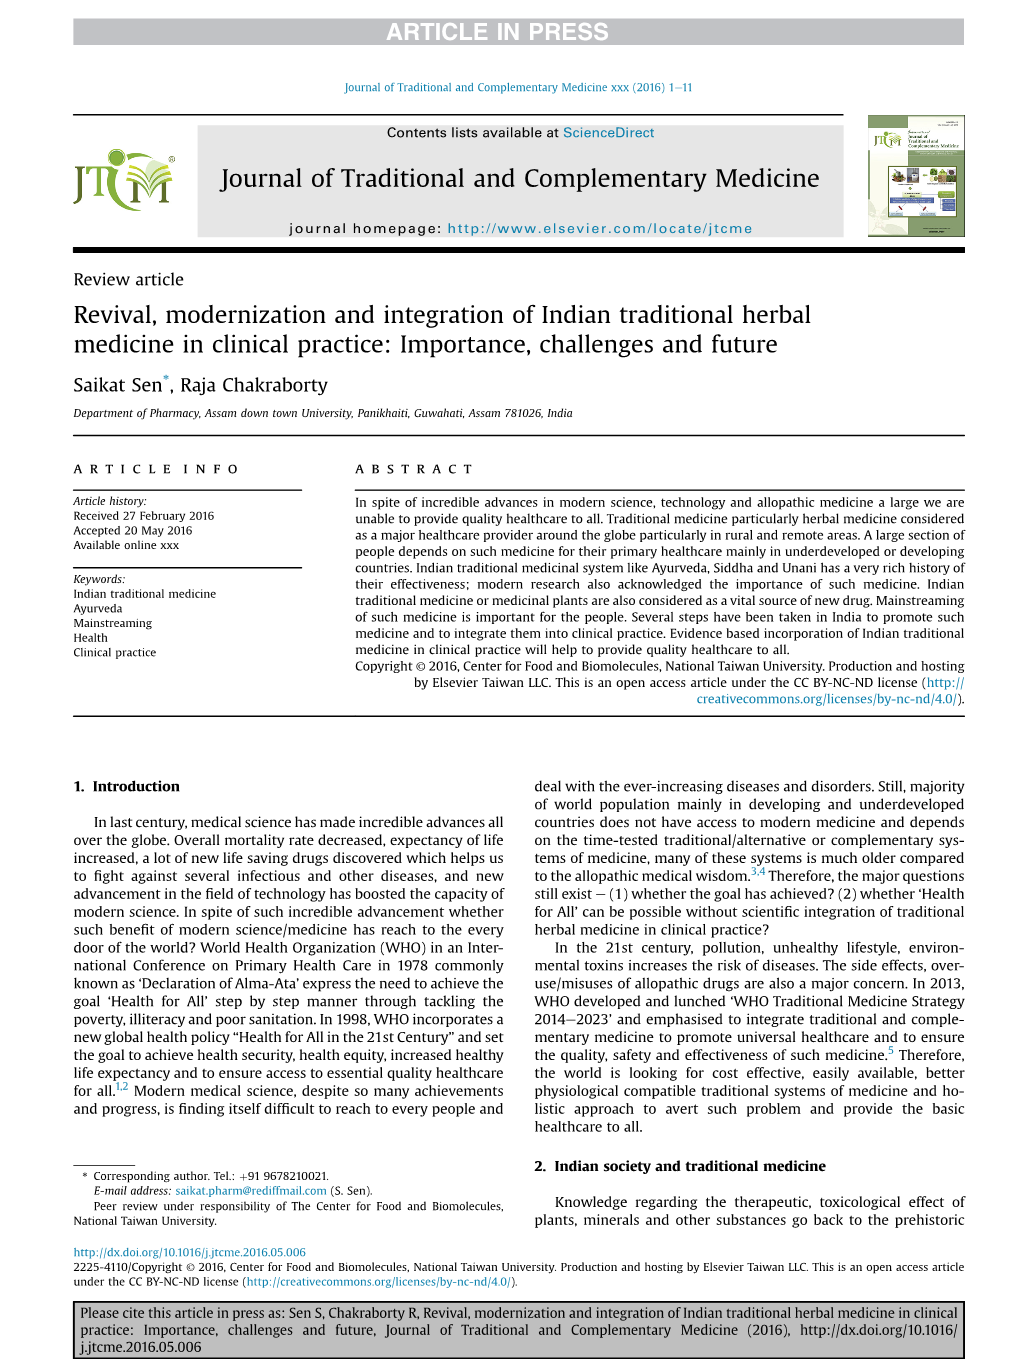 Revival, Modernization and Integration of Indian Traditional Herbal Medicine in Clinical Practice: Importance, Challenges and Future